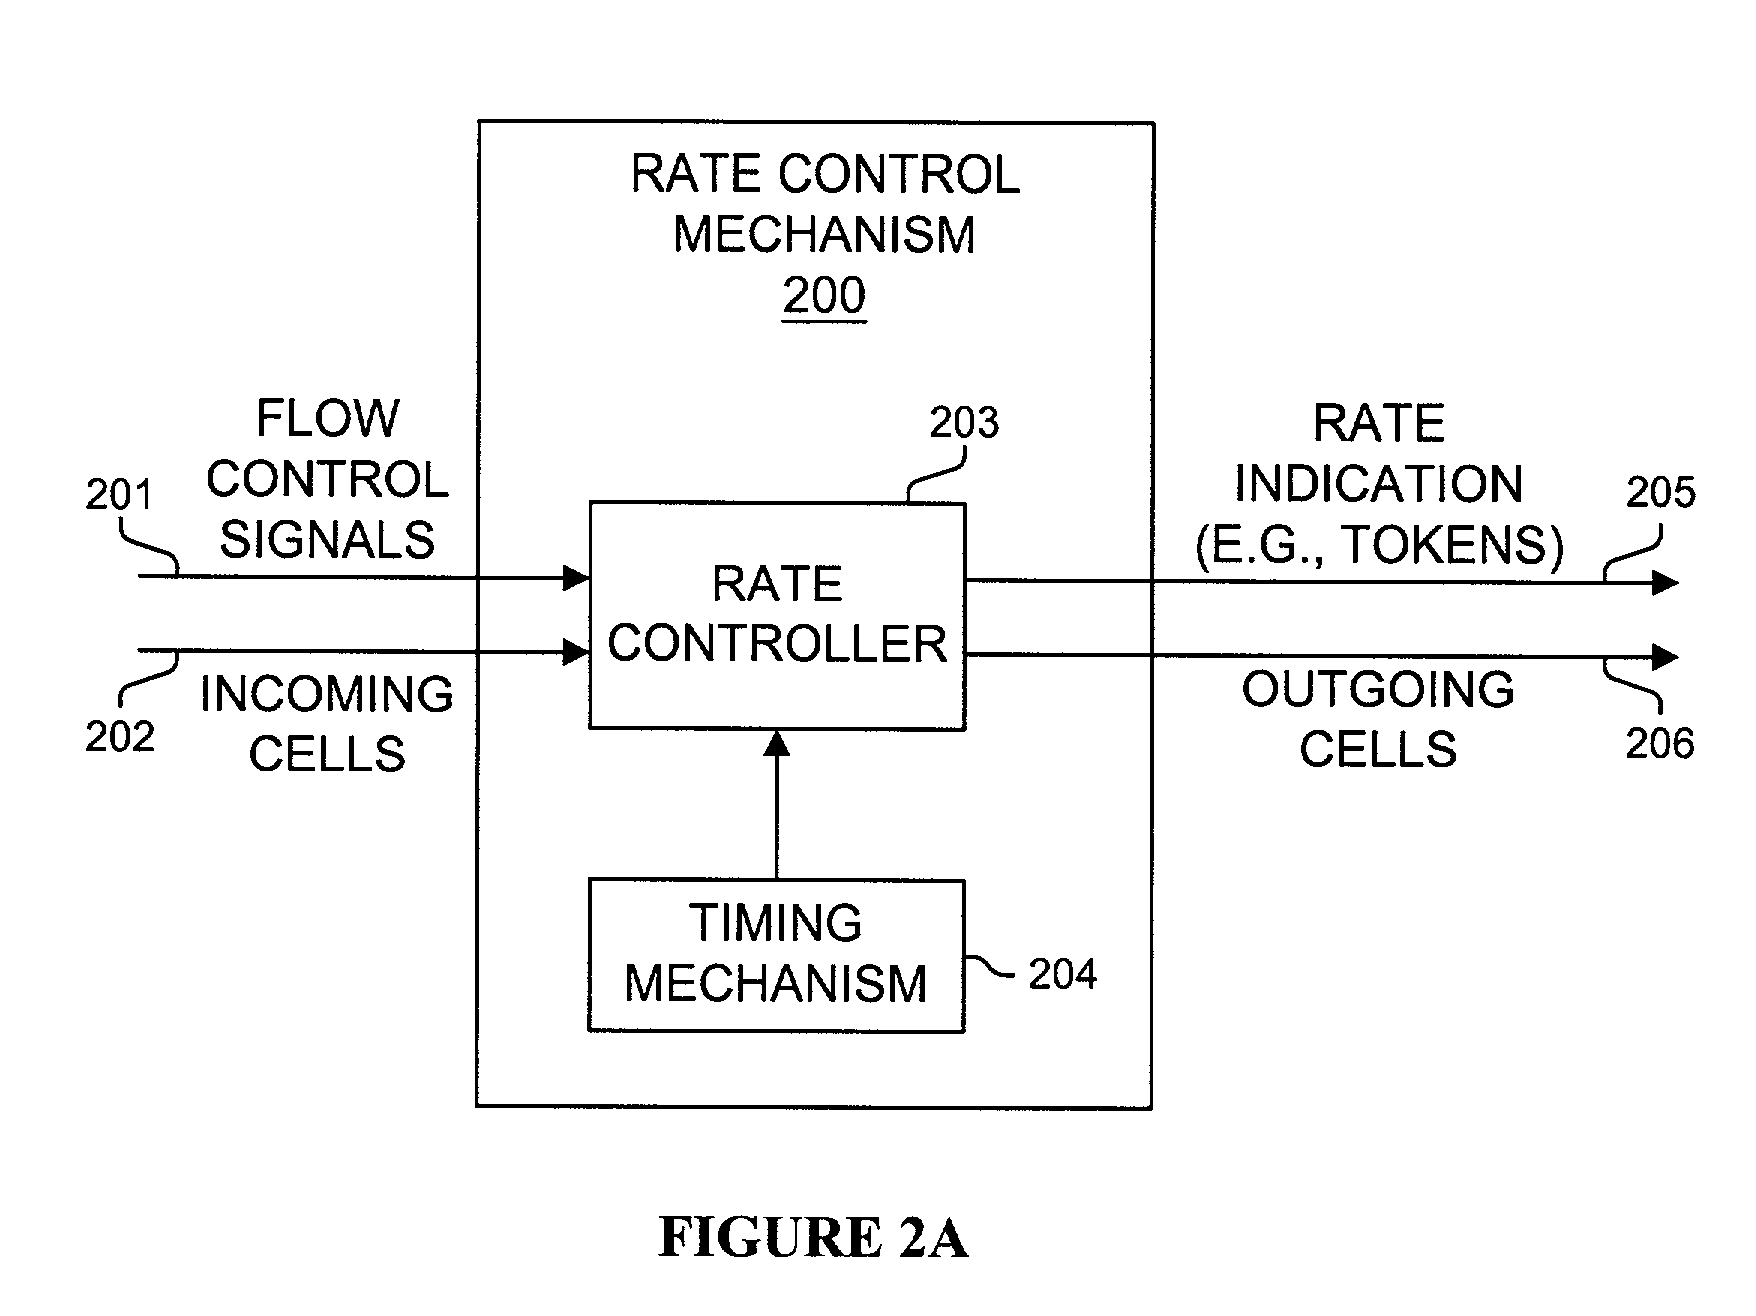 Method and apparatus for an adaptive rate control mechanism reactive to flow control messages in a packet switching system